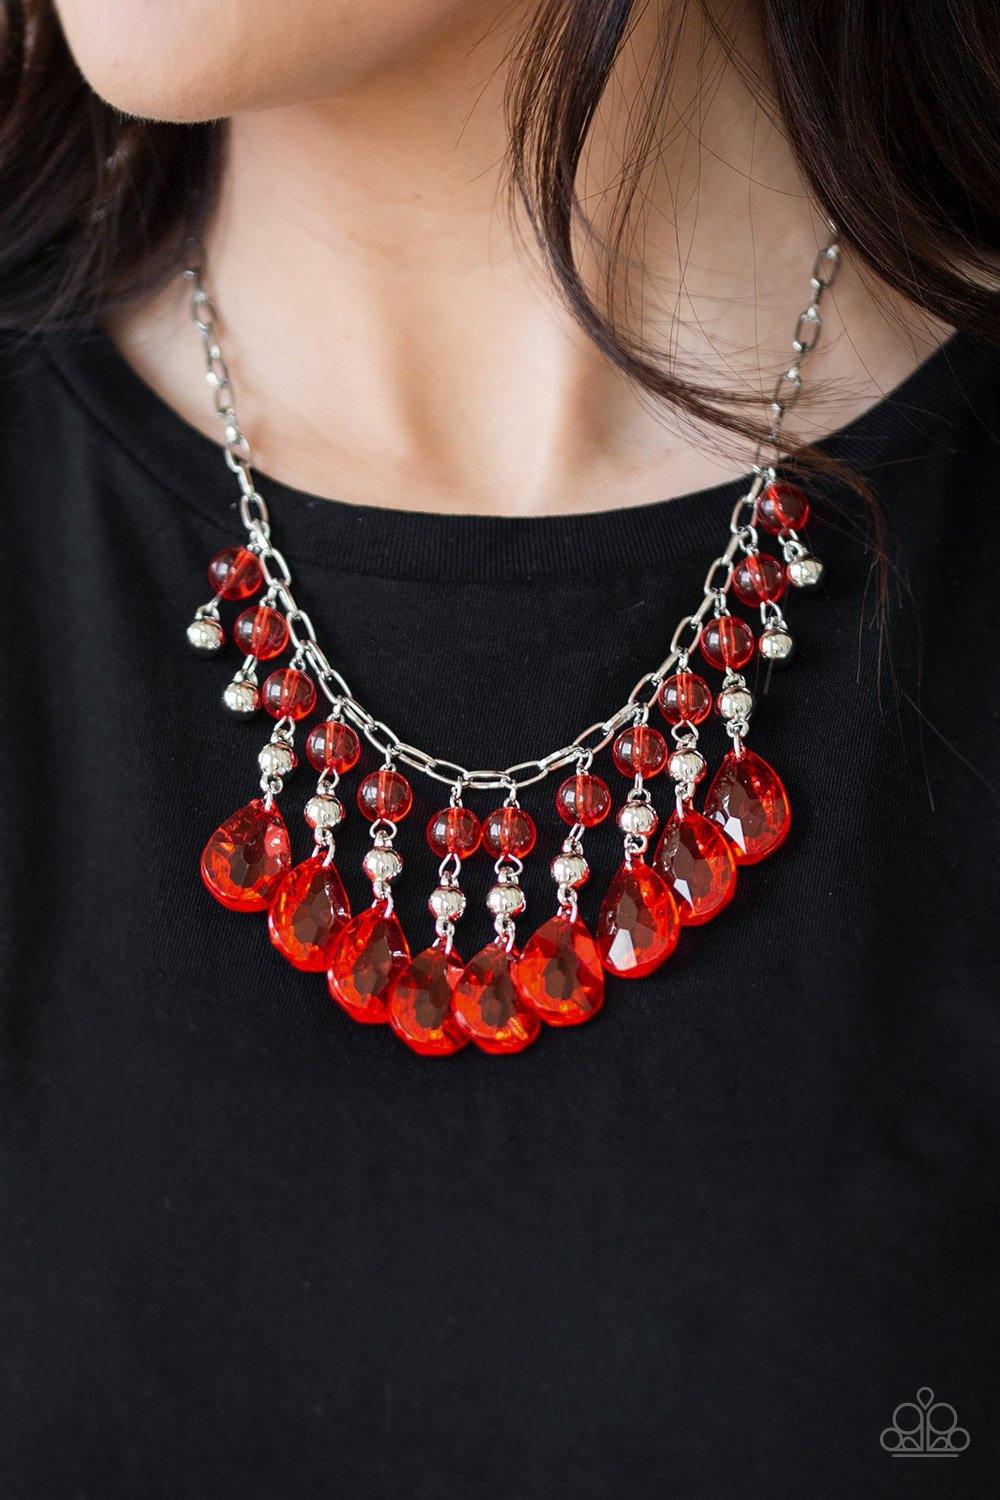 Beauty School Drop Out - Red Paparazzi Necklace - sofancyjewels